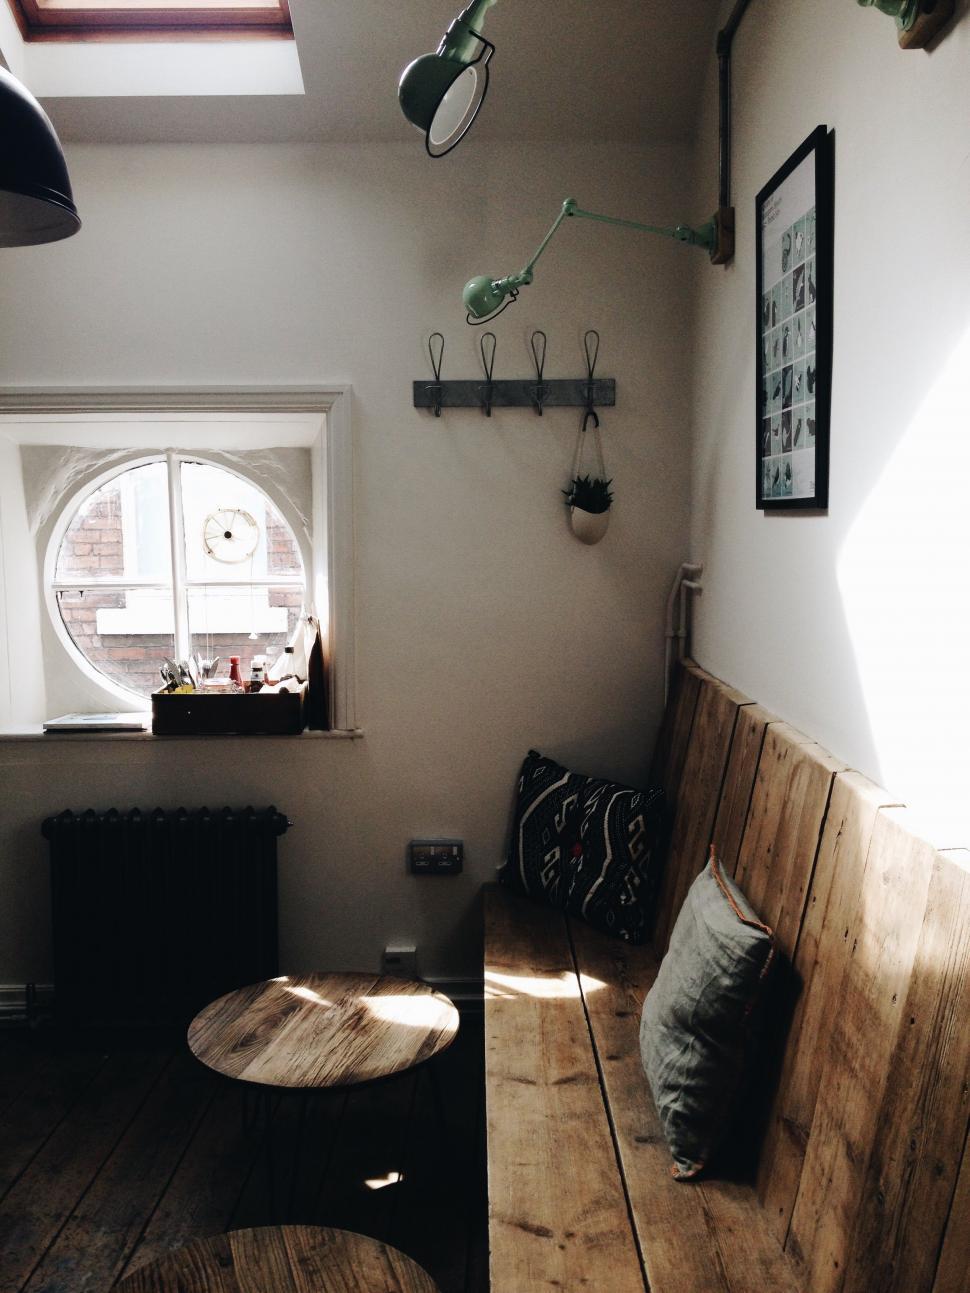 Free Image of Room With Wooden Bench and Window 